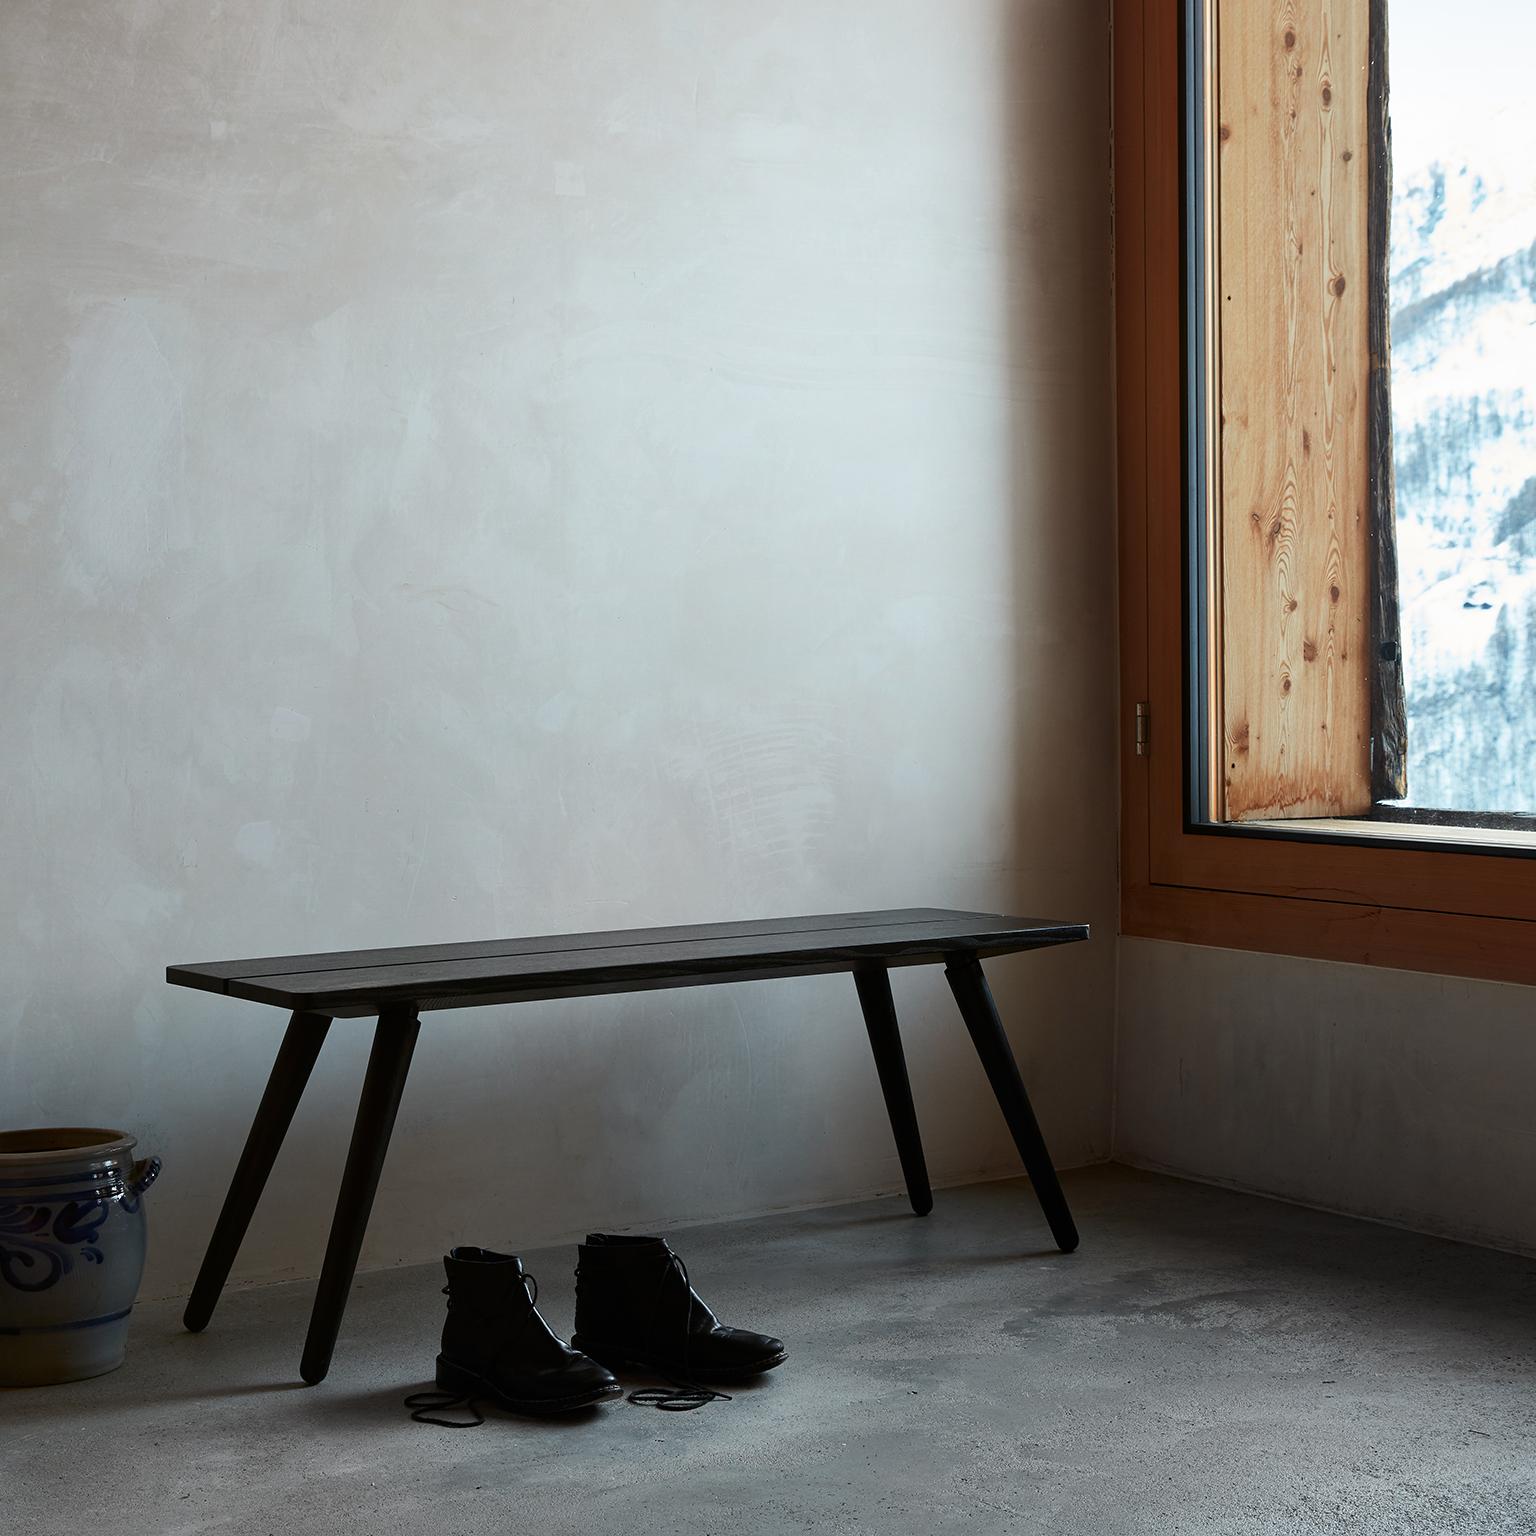 Our Stabellenbank, or stable bench, is a modern twist on a Swiss Classic, widely found in homes, farms and taverns. It is held together by four hand-turned legs and strong joinery, made from 100% solid European ash. Any weight applied to the seat